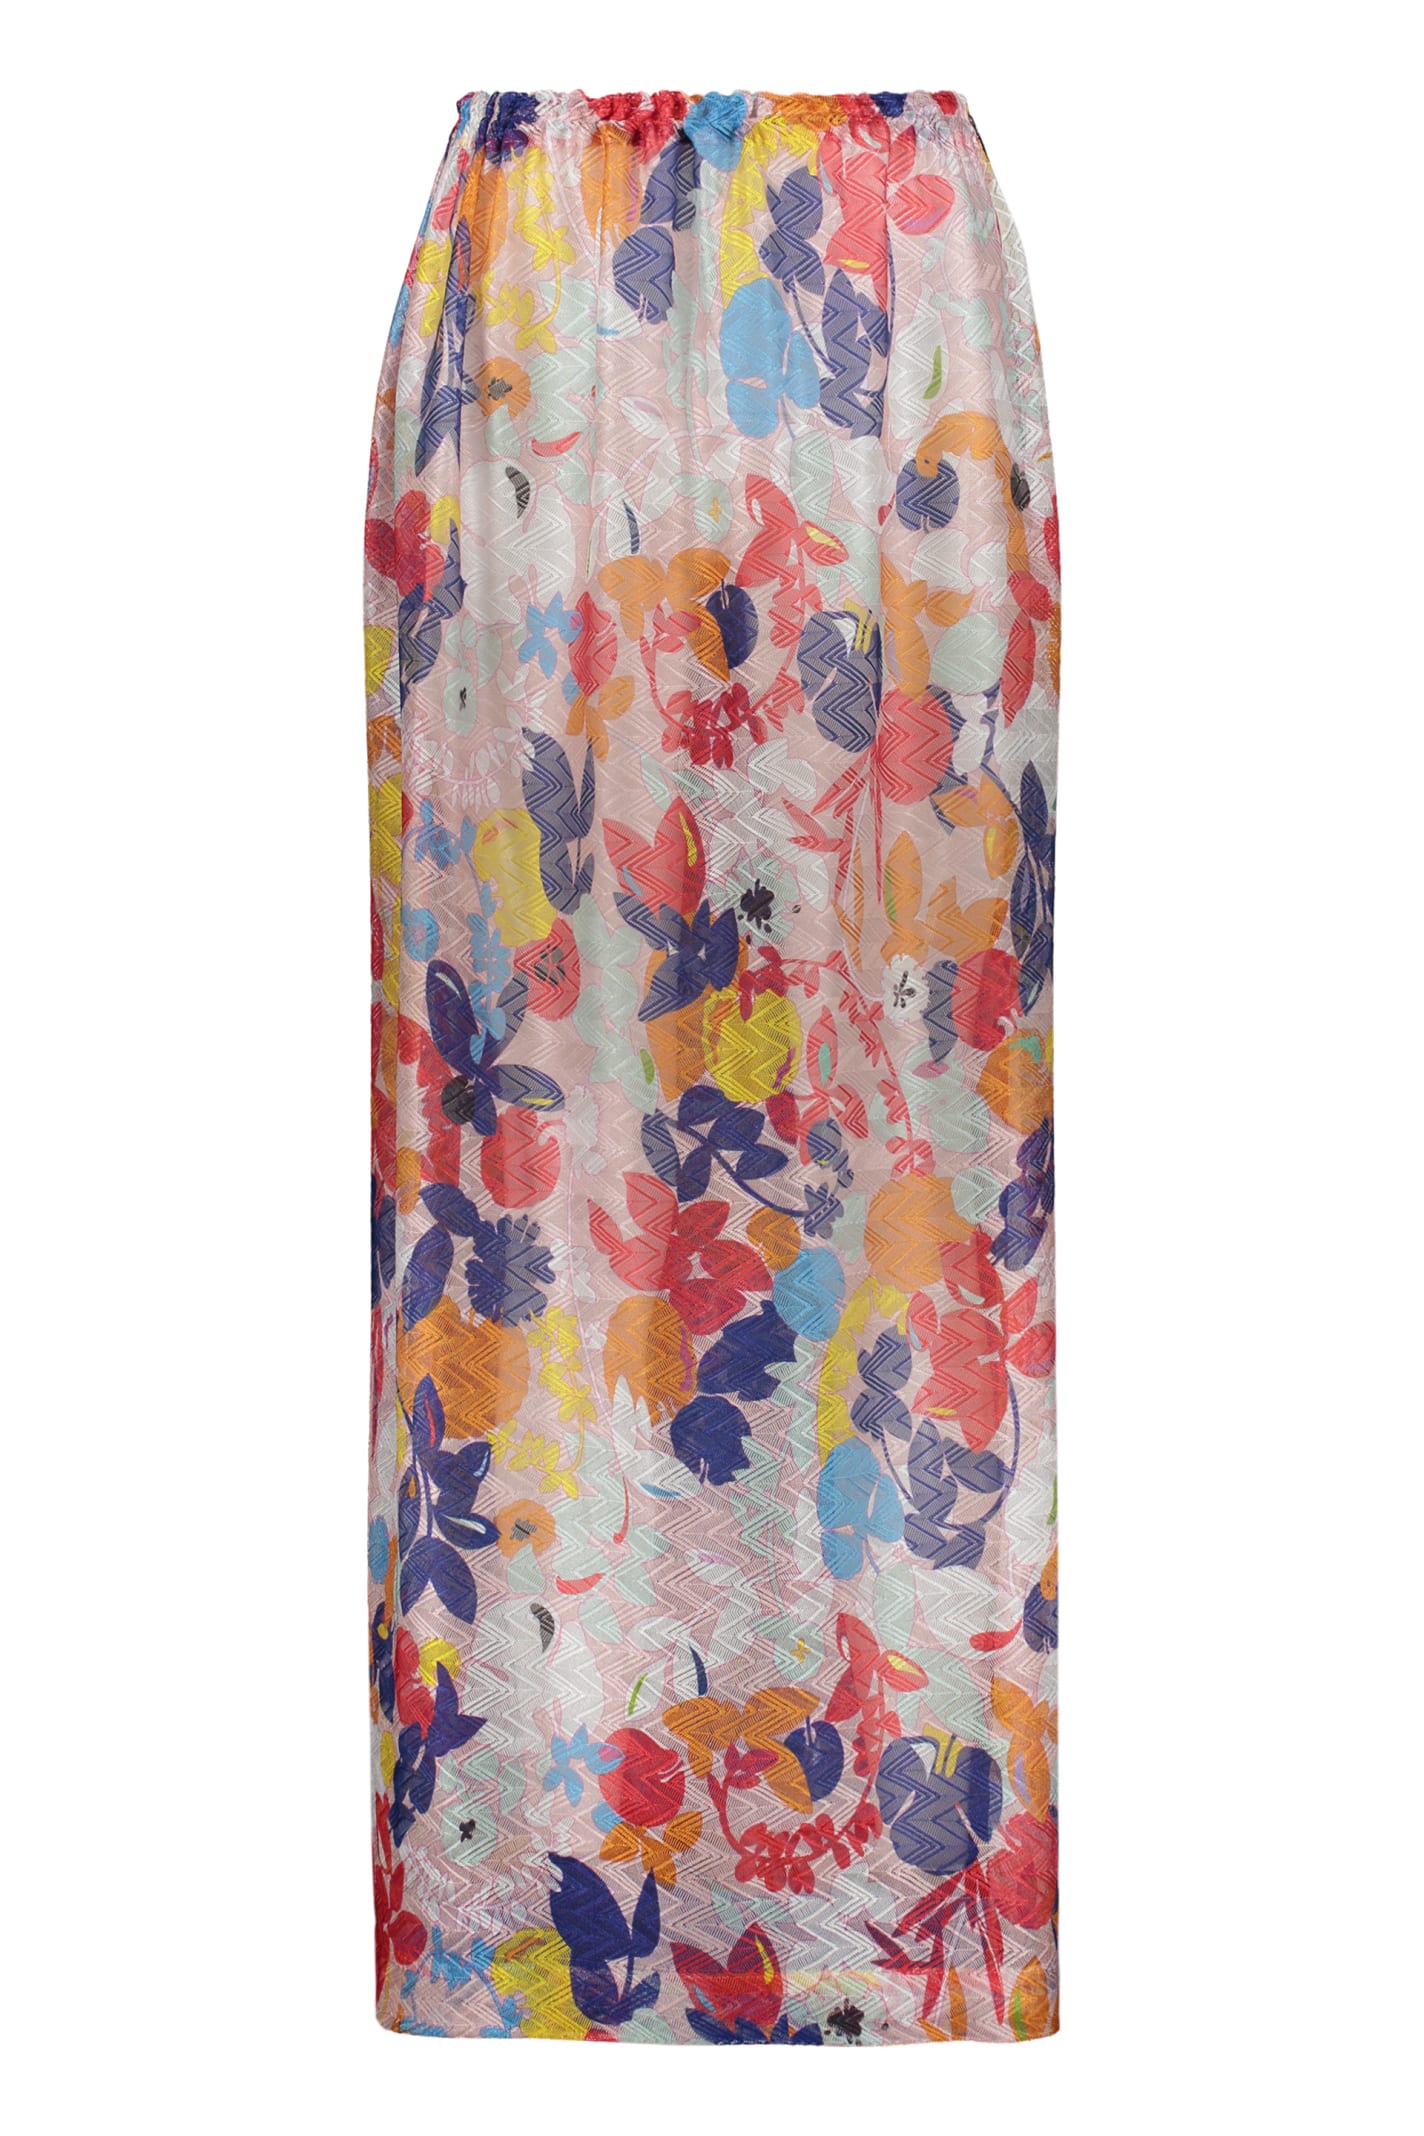 Missoni Beach Cover Up Skirt In Multicolor